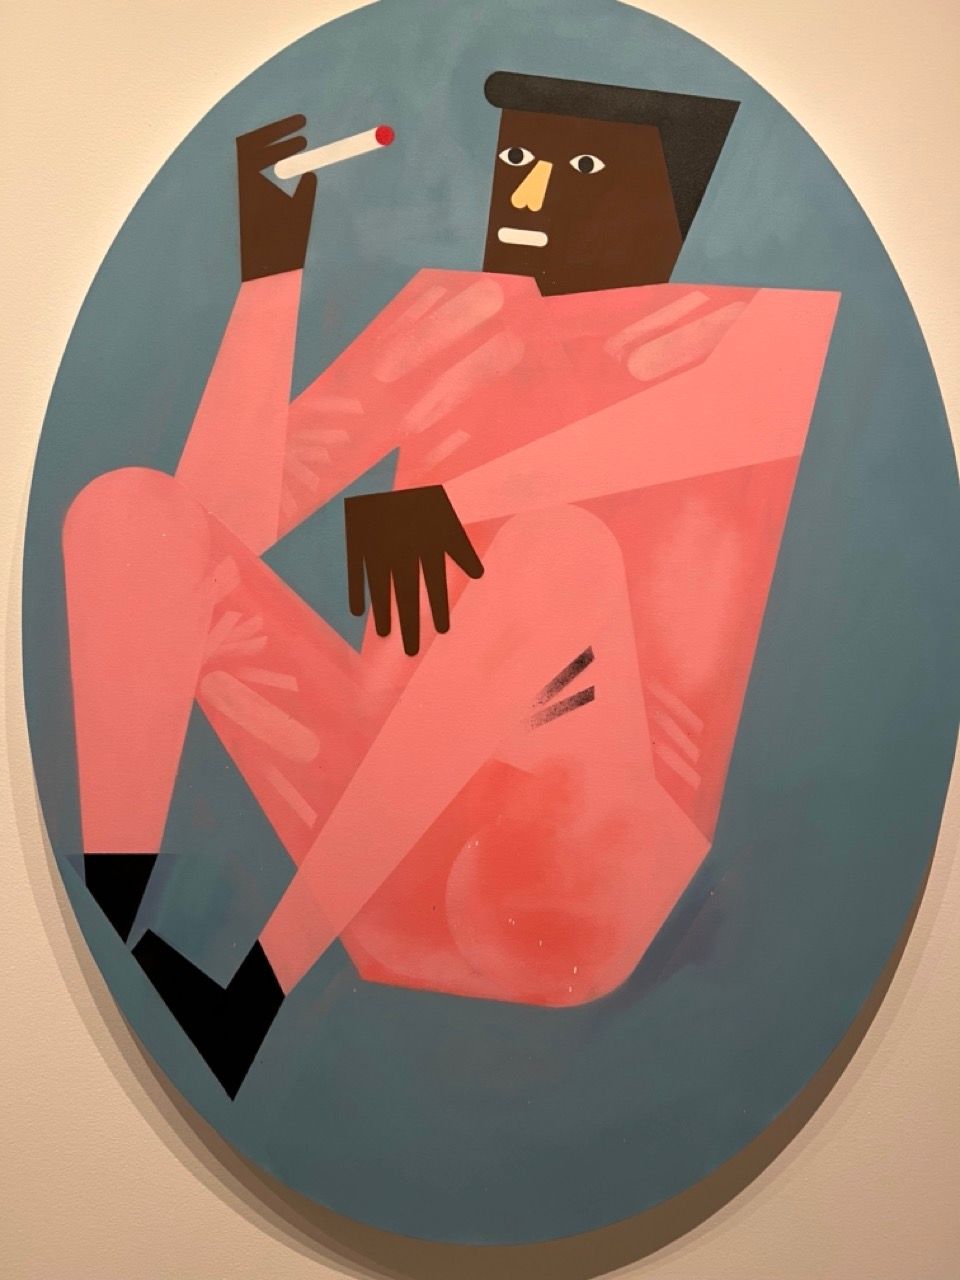 A collaged figure of a person wearing pink